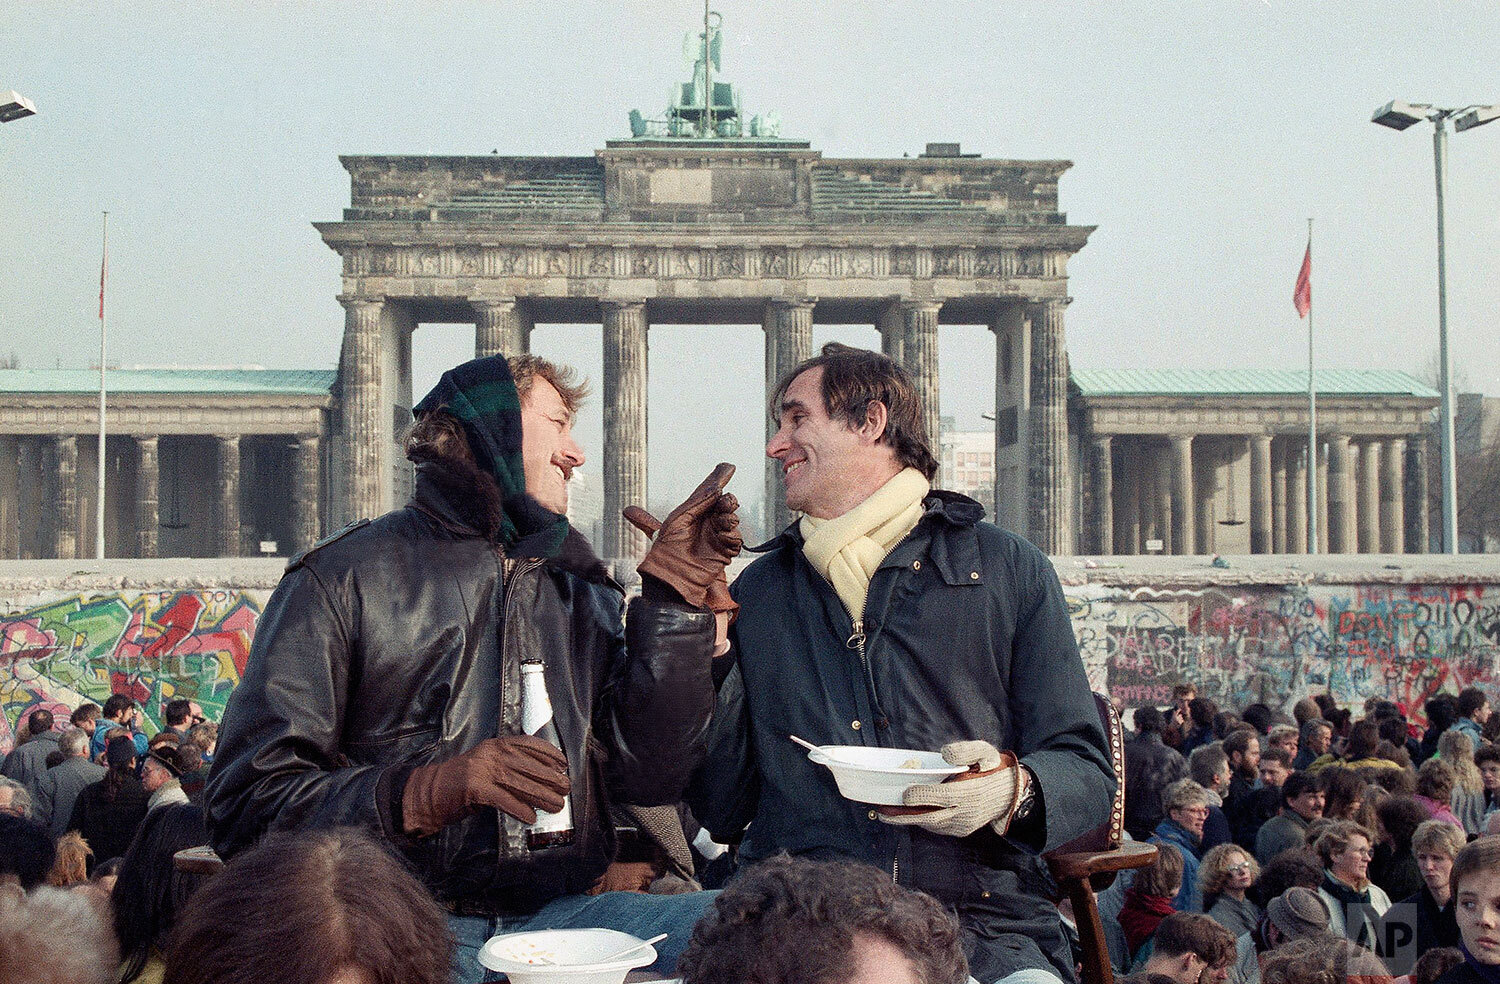  Two Berliners chat in front of Brandenburg Gate in Berlin, Nov. 12, 1989 while having lunch on a visitor's platform near the Berlin Wall. (AP Photo/Lionel Cironneau) 